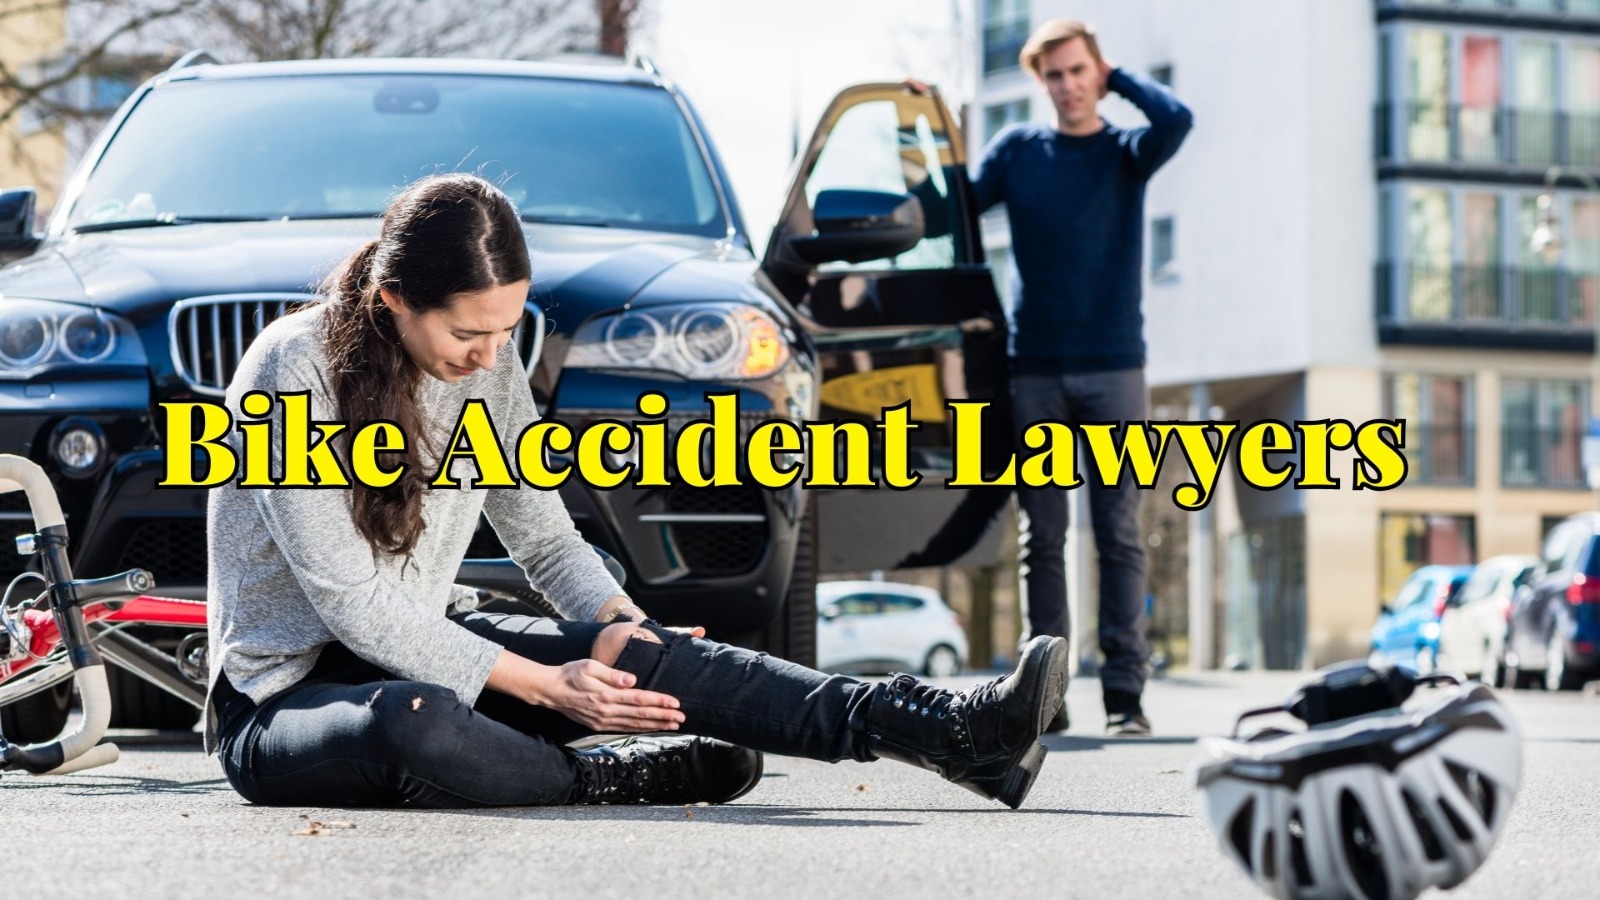 Accident Lawyers: Your Ultimate Guide to Seeking Legal Assistance After a Cycling Mishap